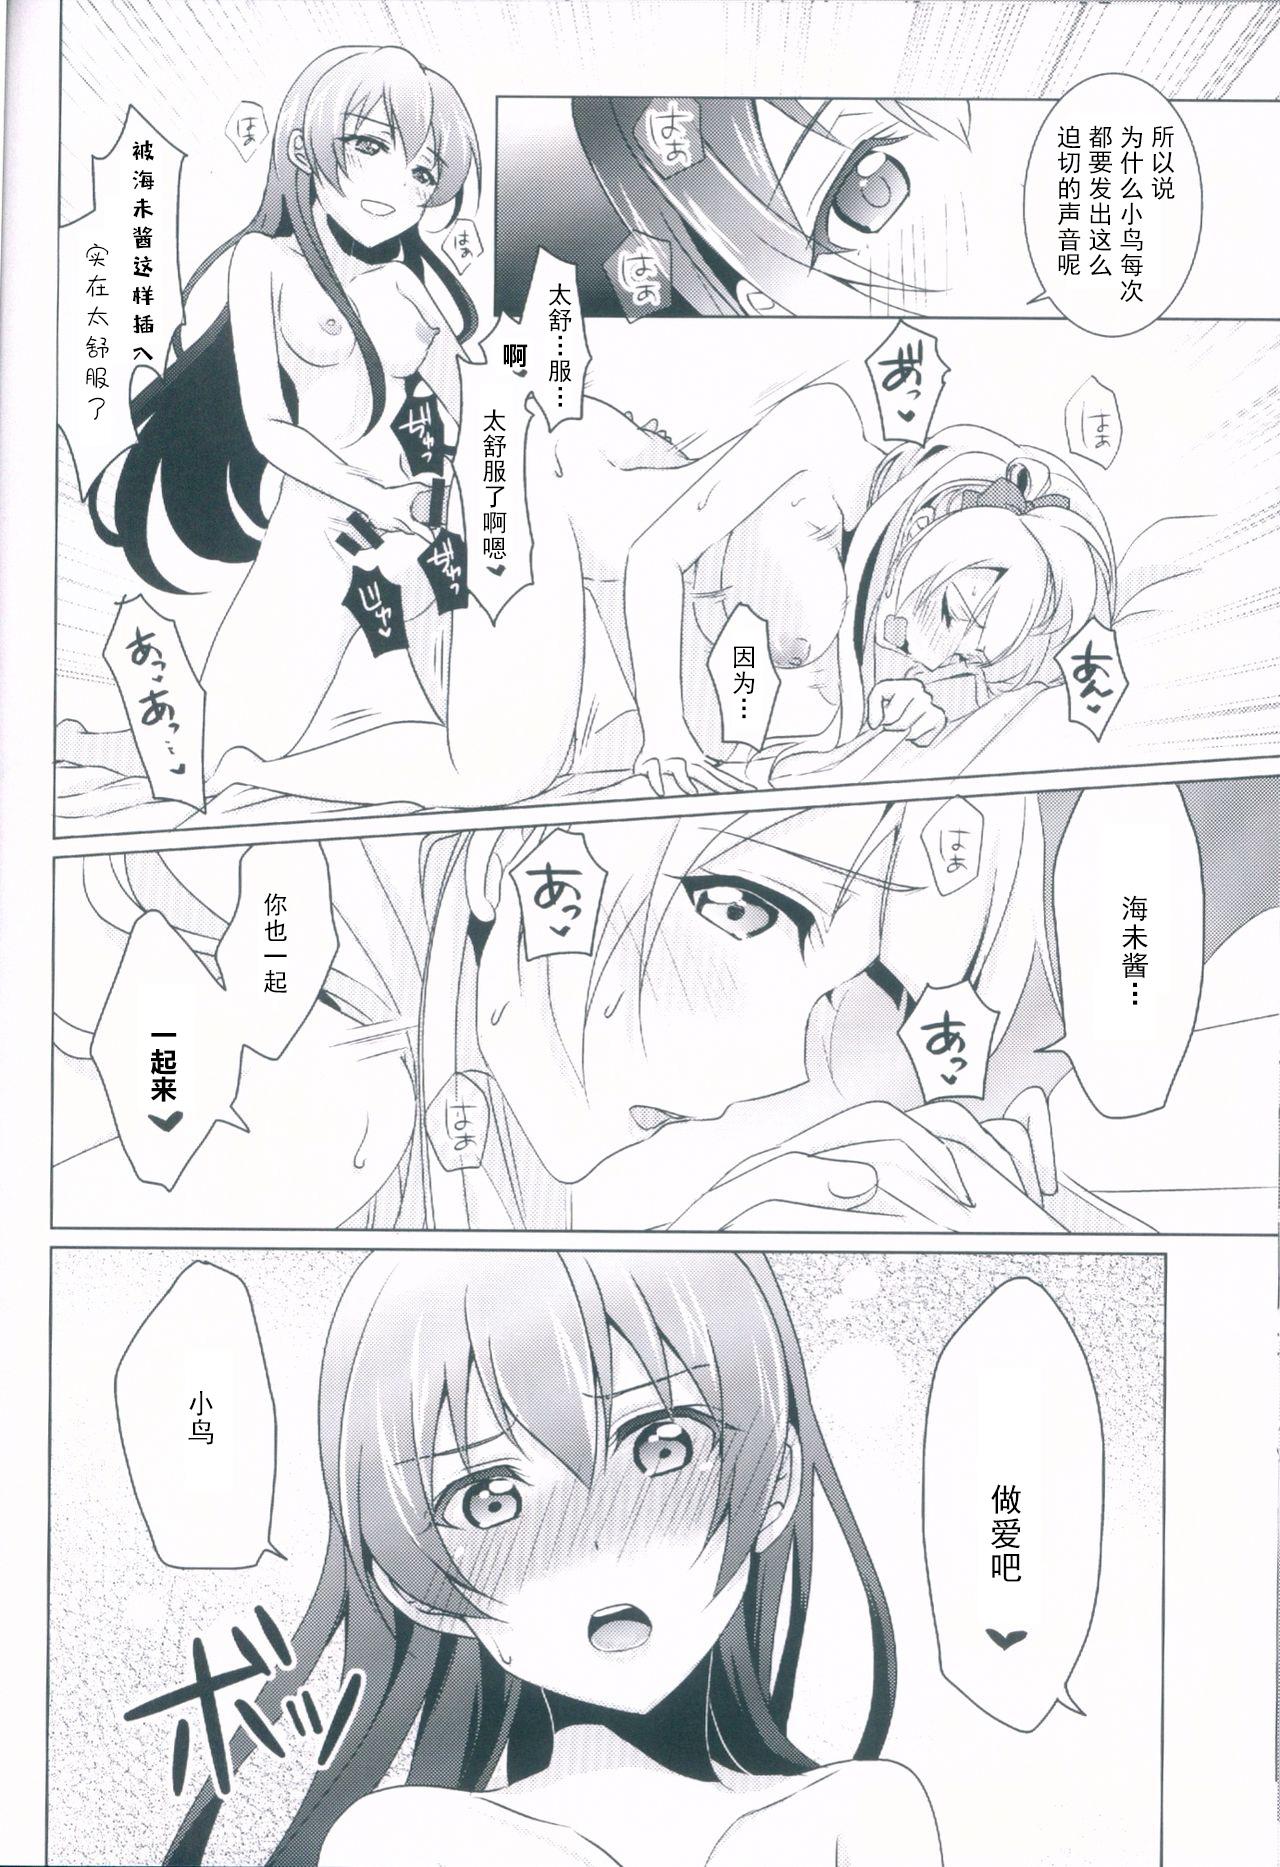 Young Tits honey*honey*days - Love live Chile - Page 11